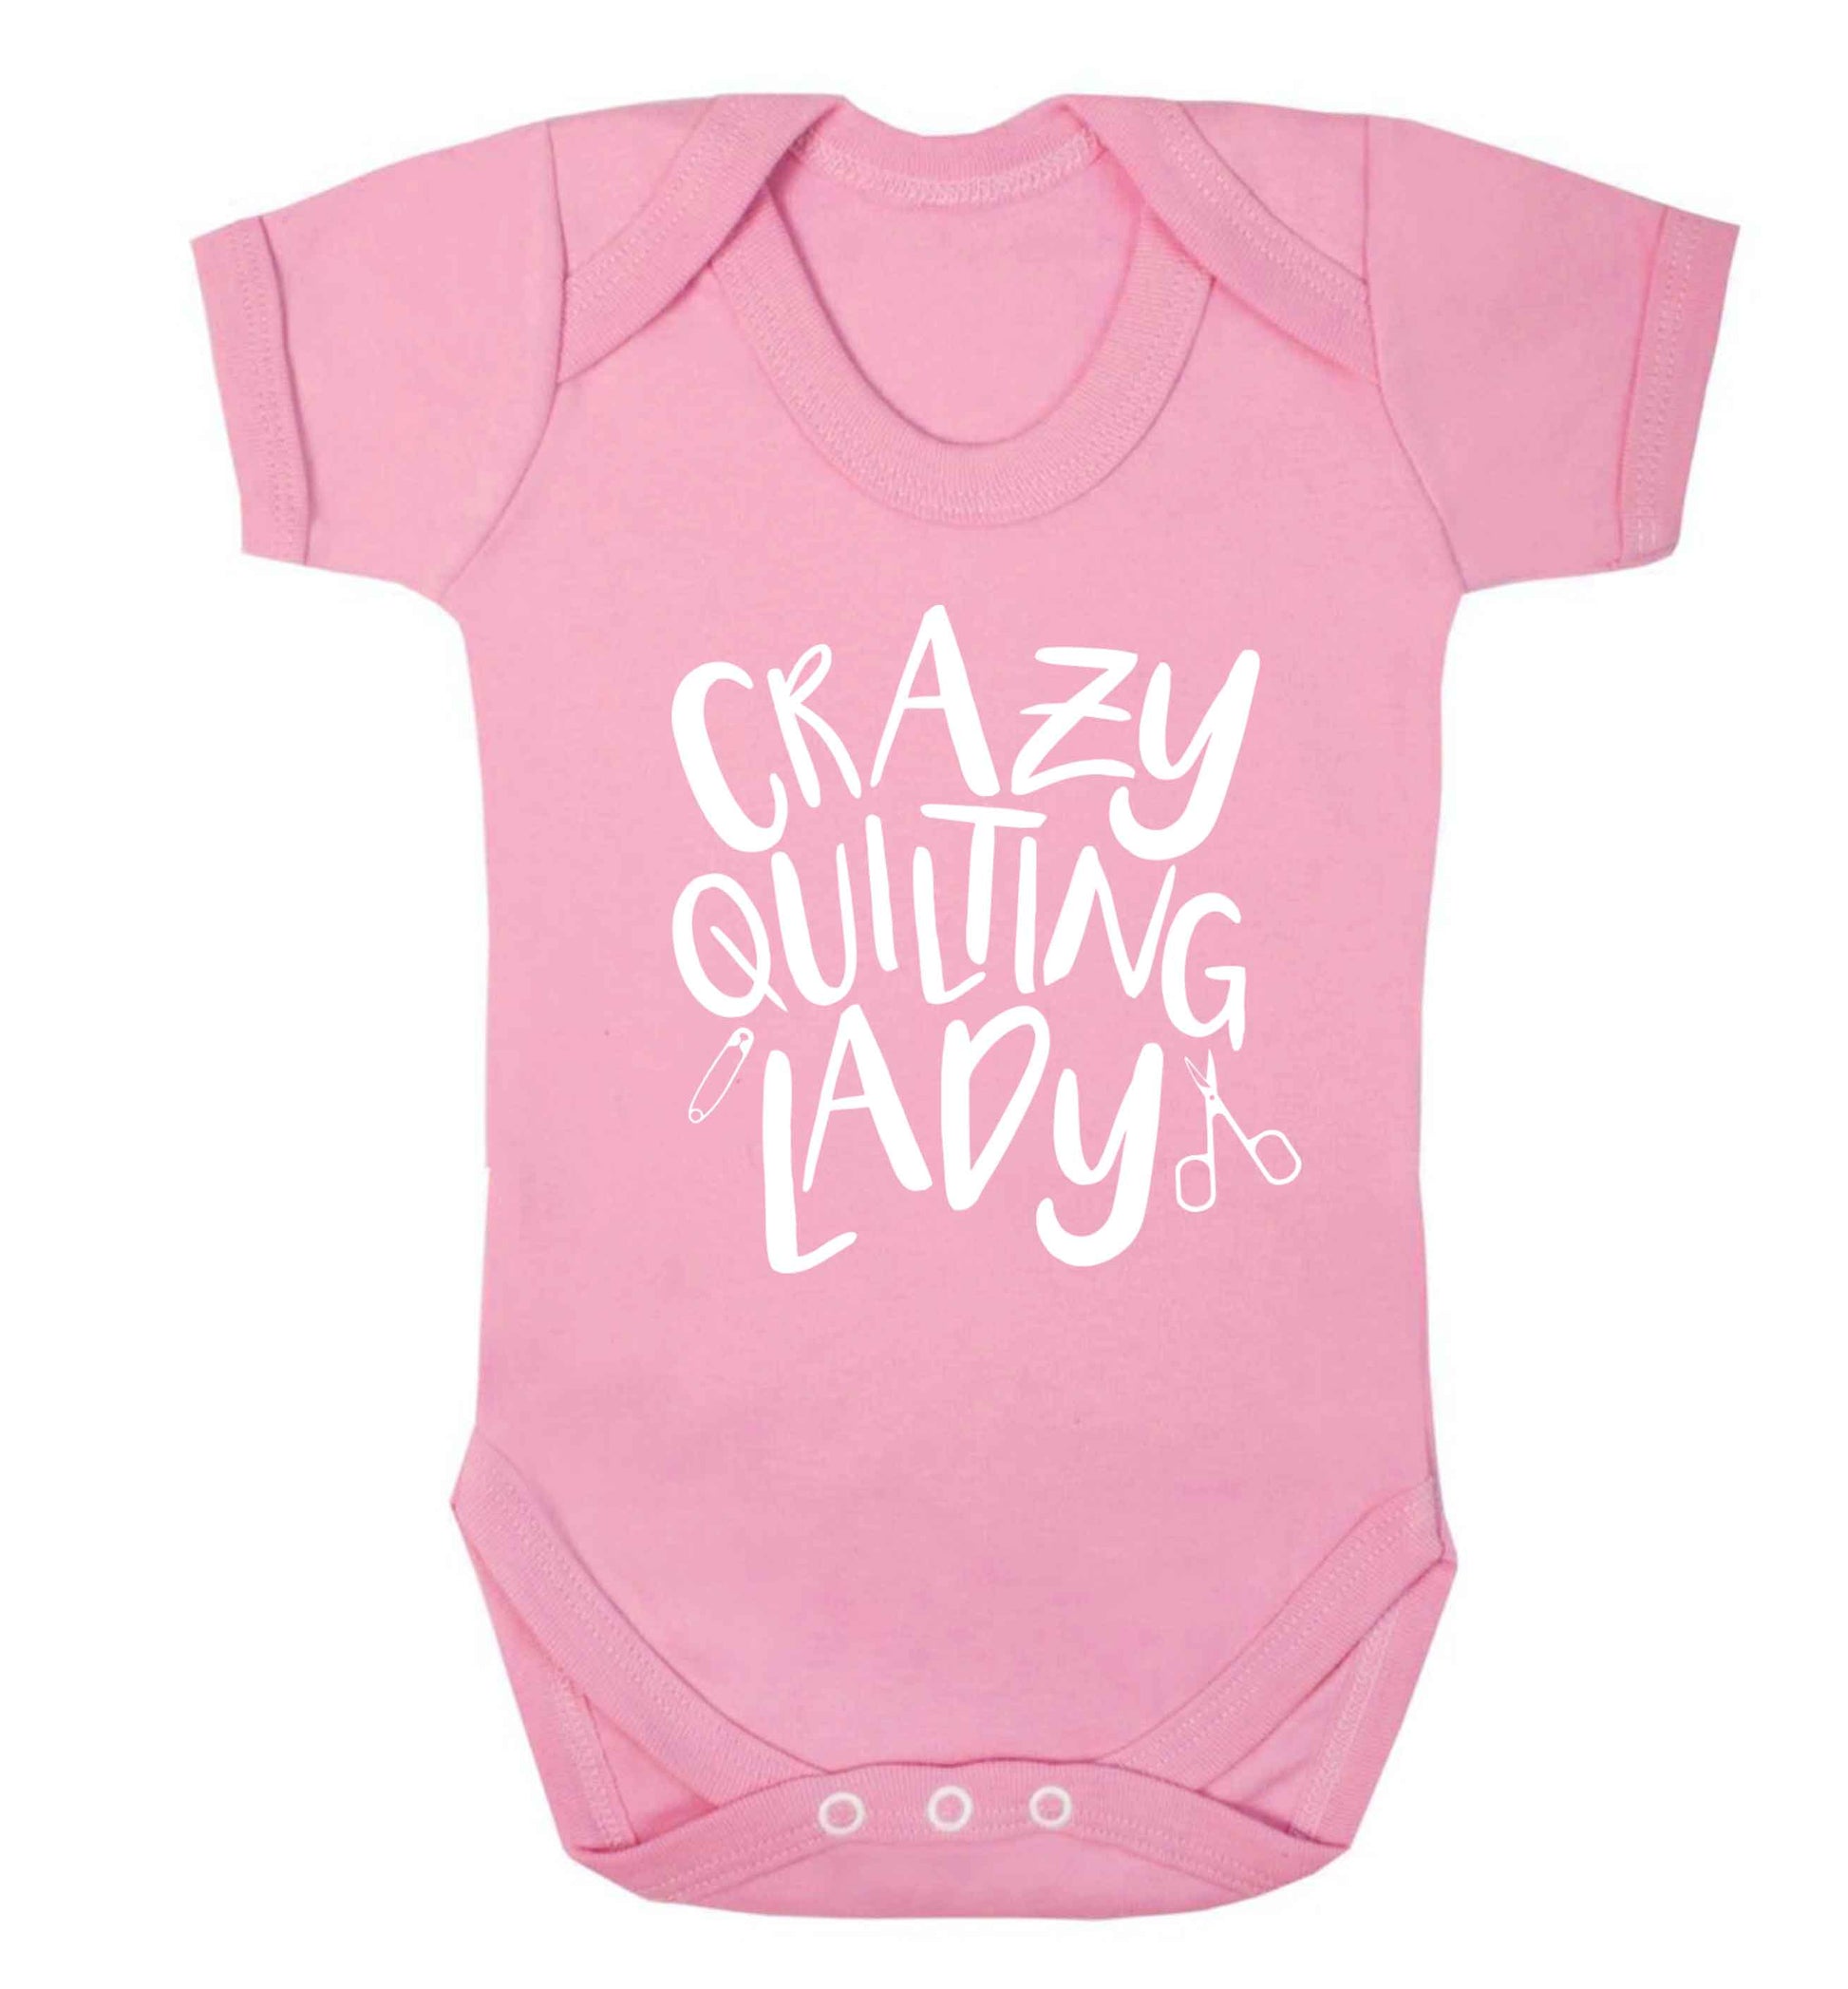 Crazy quilting lady Baby Vest pale pink 18-24 months